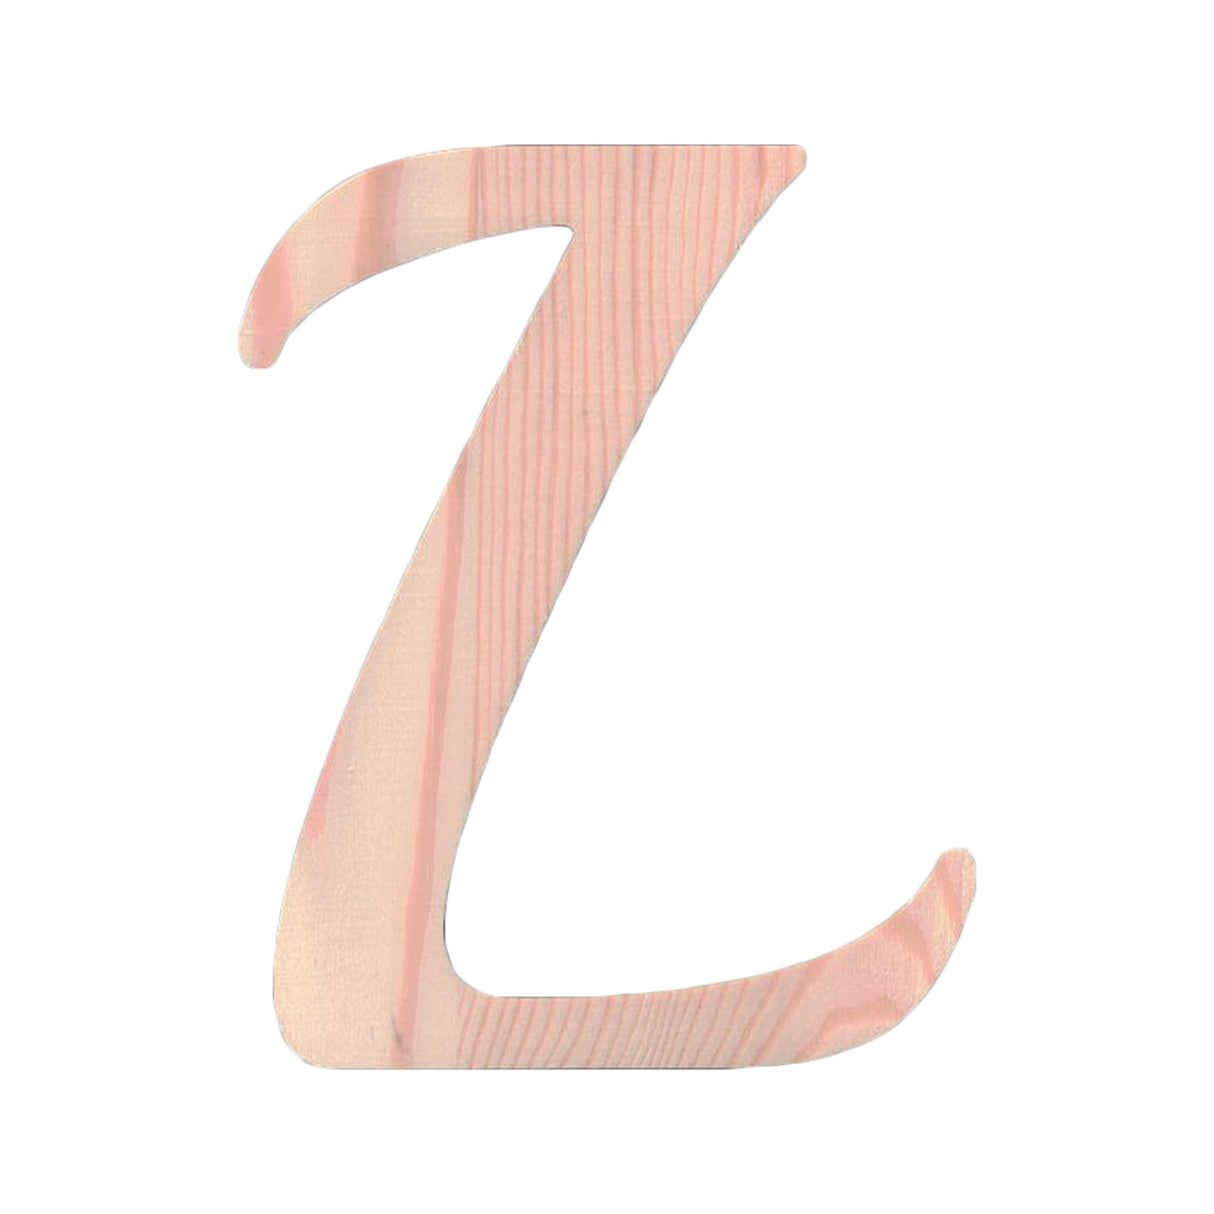 Unfinished Wooden Playball Italic Letter L (6.25 Inches) in Beige color,  shape